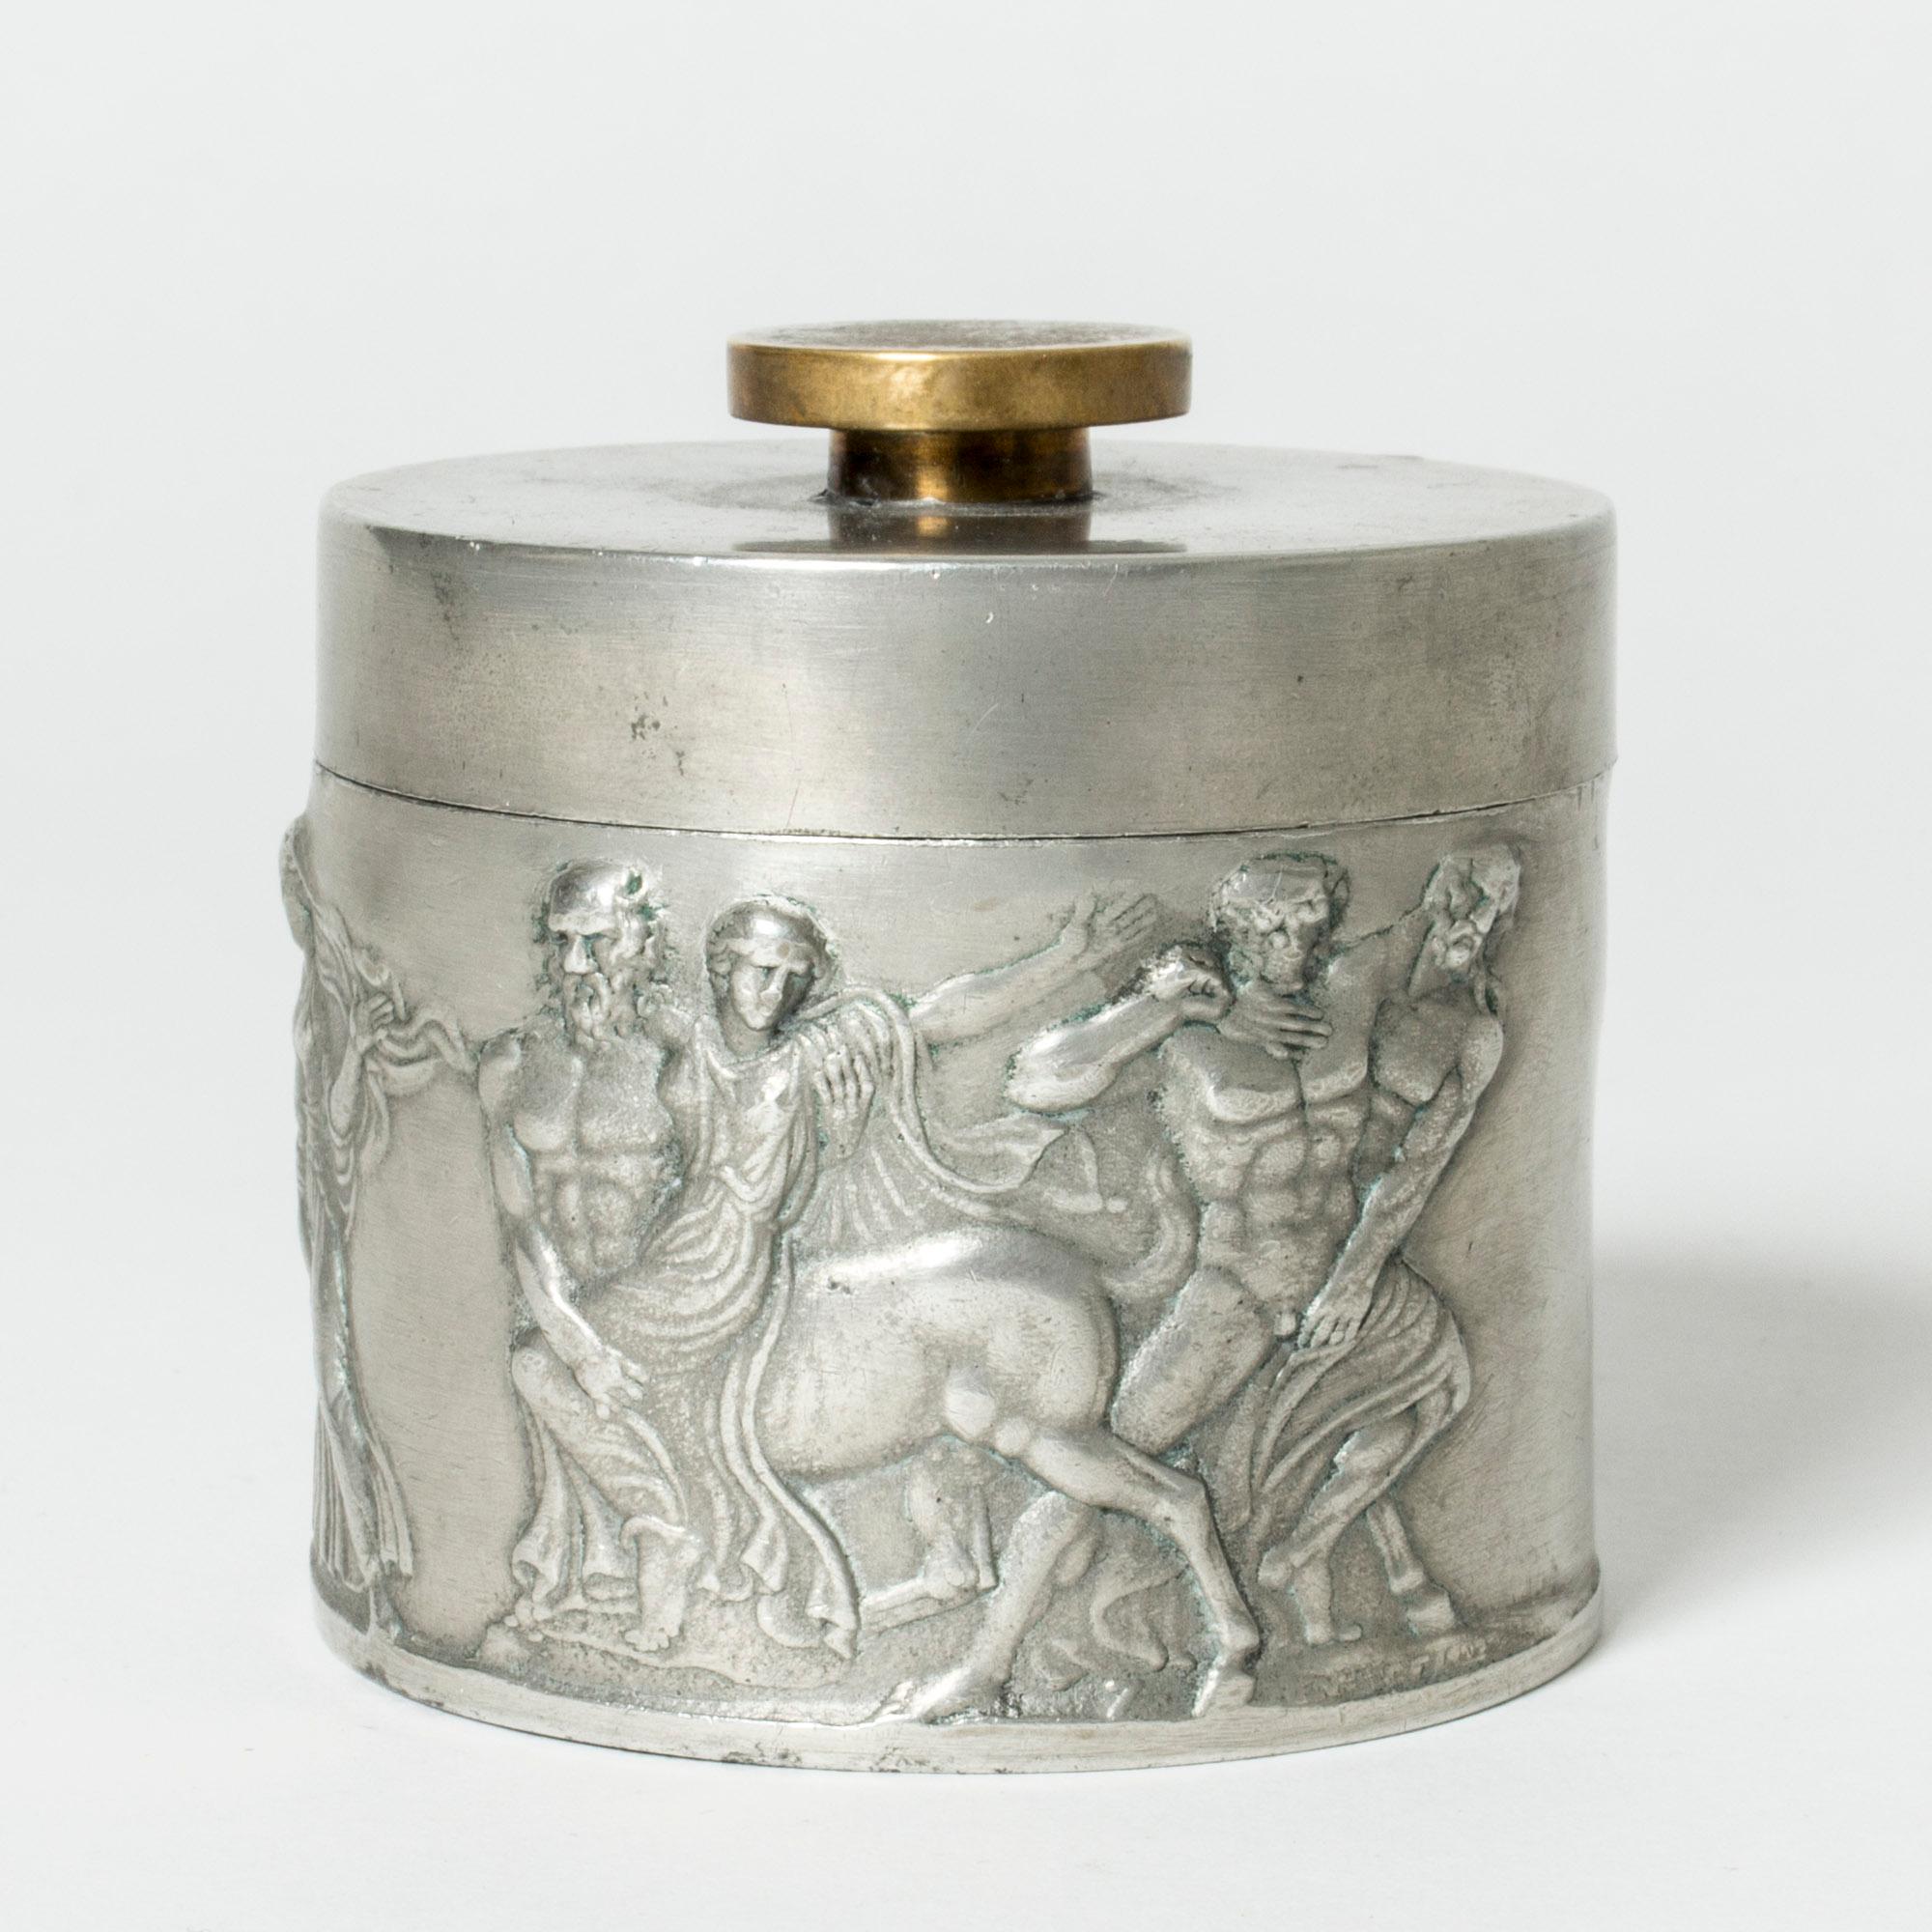 Pewter jar with brass knob. Designed by Herman Bergman, who was the founder of Herman Bergman’s Fine Art Foundry, purveyor to the Royal Court. Beautiful execution.

The images depicted are from the Bassai (sometimes spelled Bassae) Frieze, which was